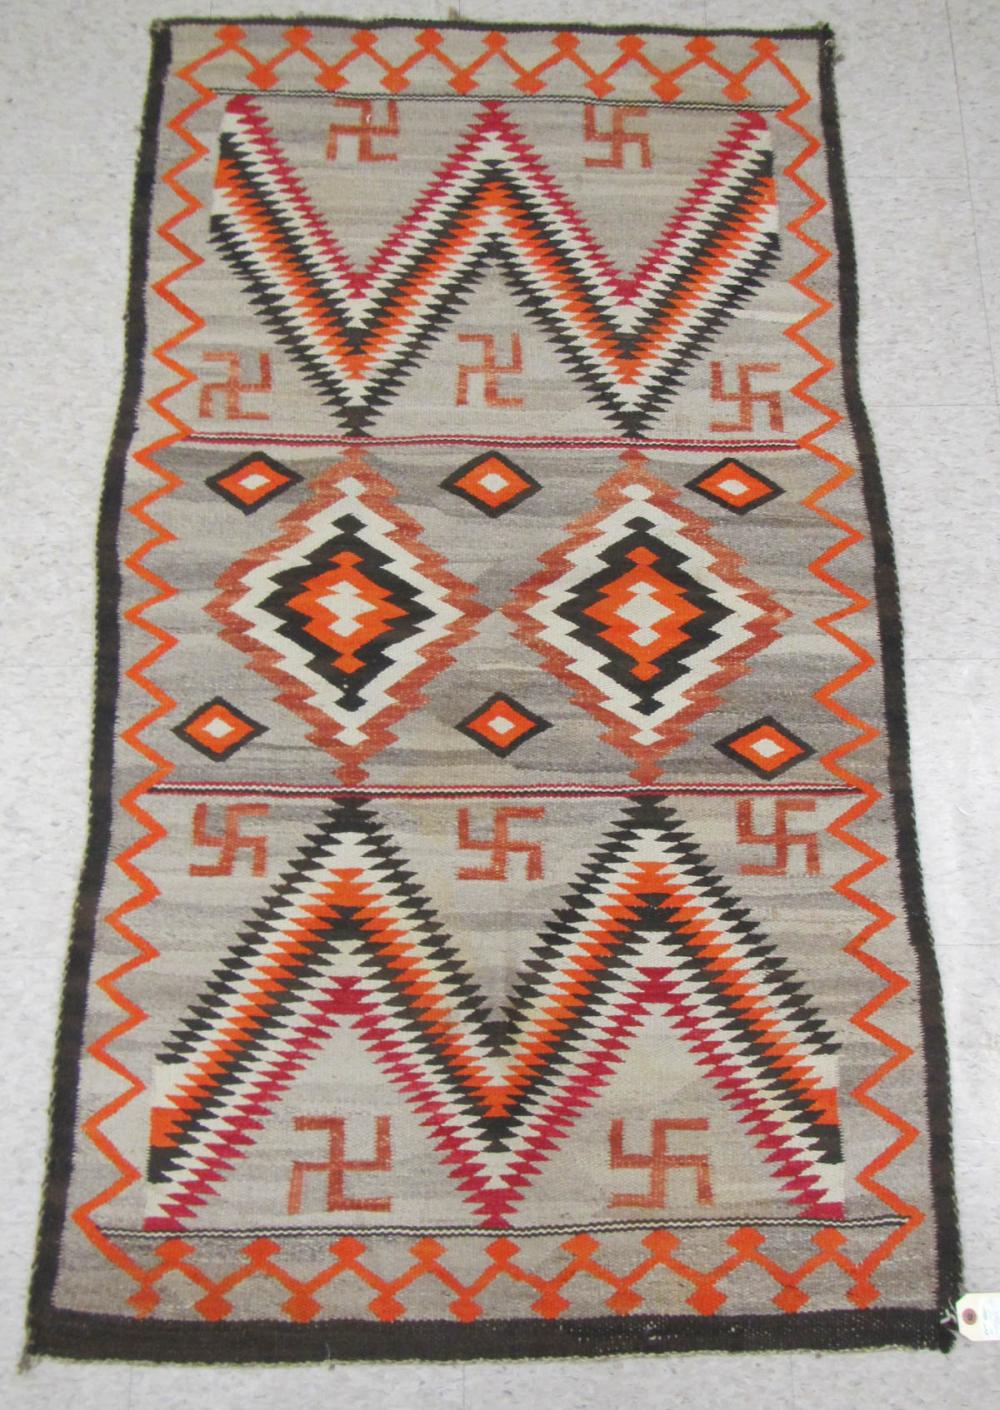 NAVAJO WEAVING, HAND WOVEN IN A